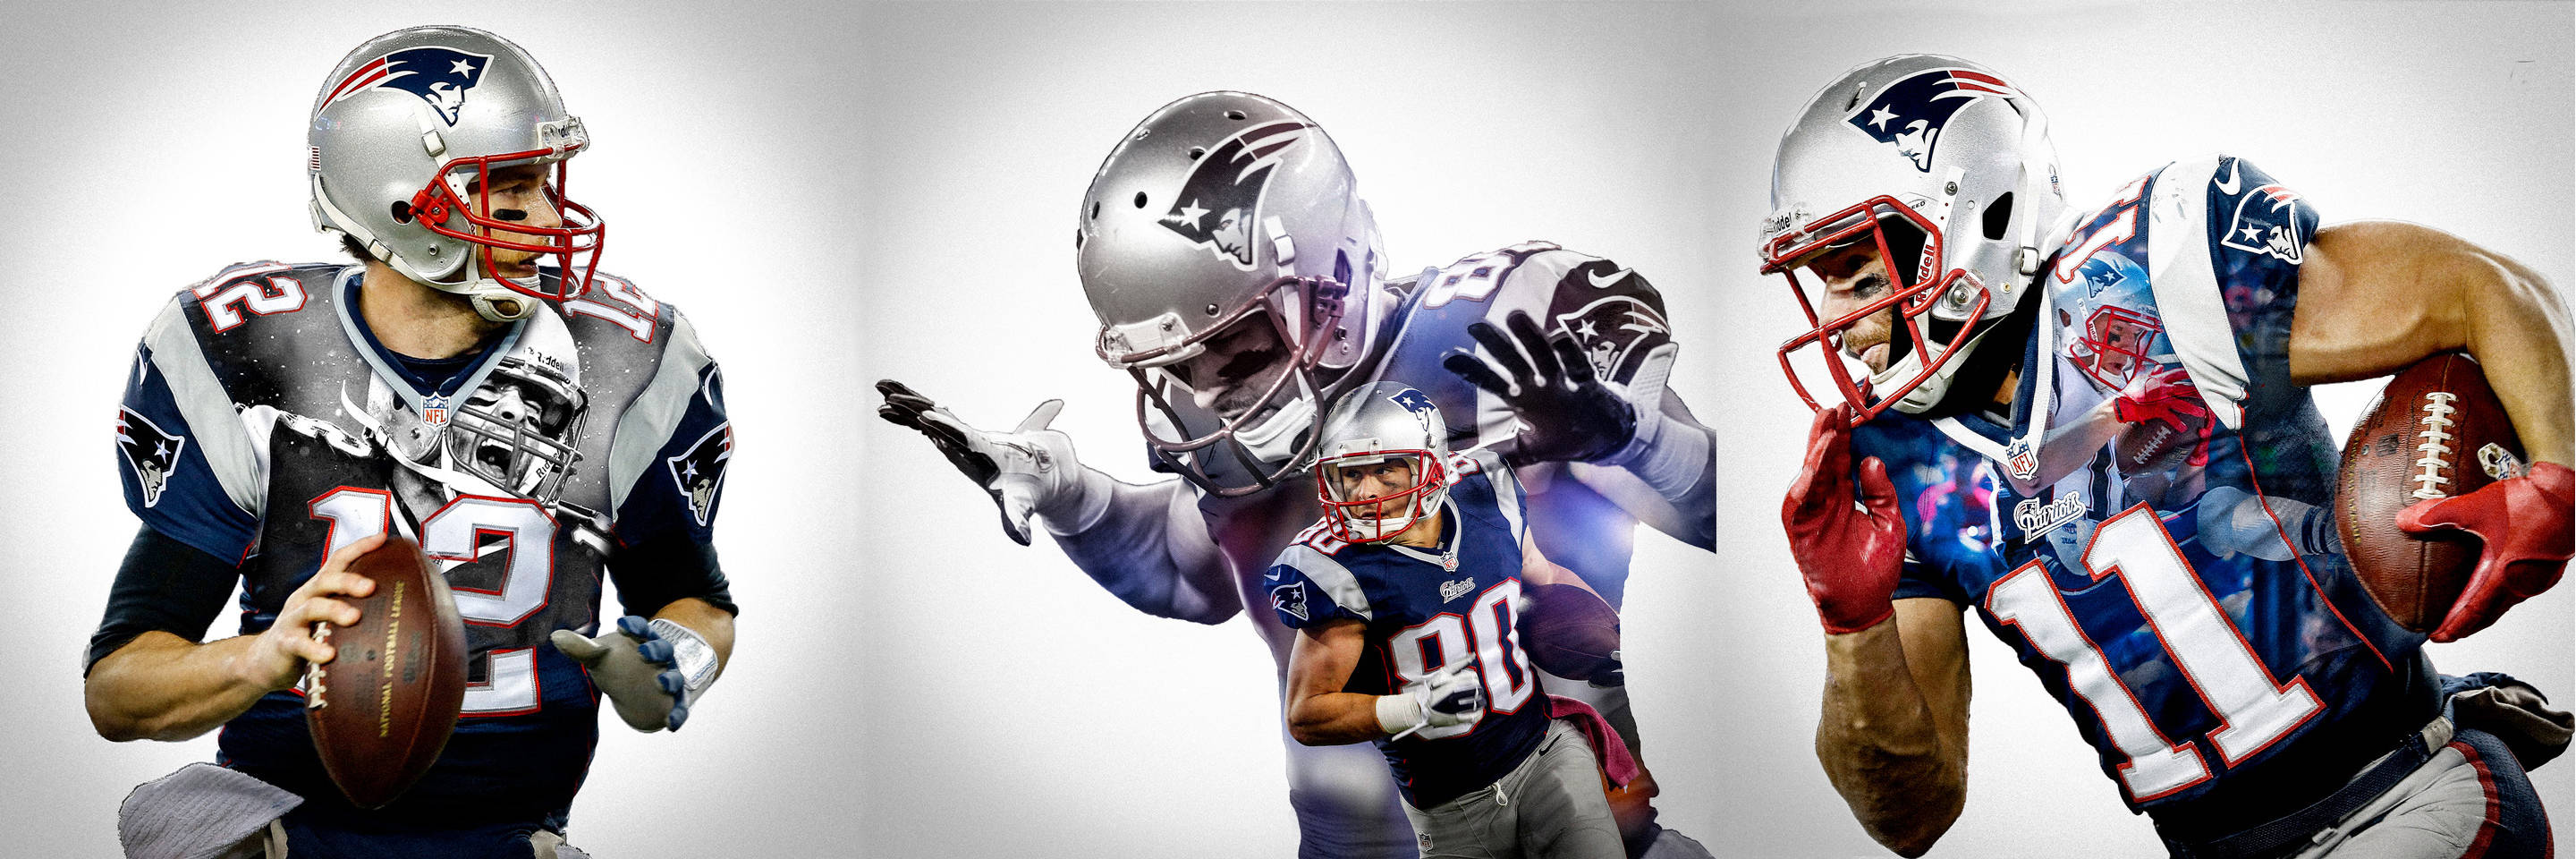 Cool Football Players With Silver Headgear Wallpaper